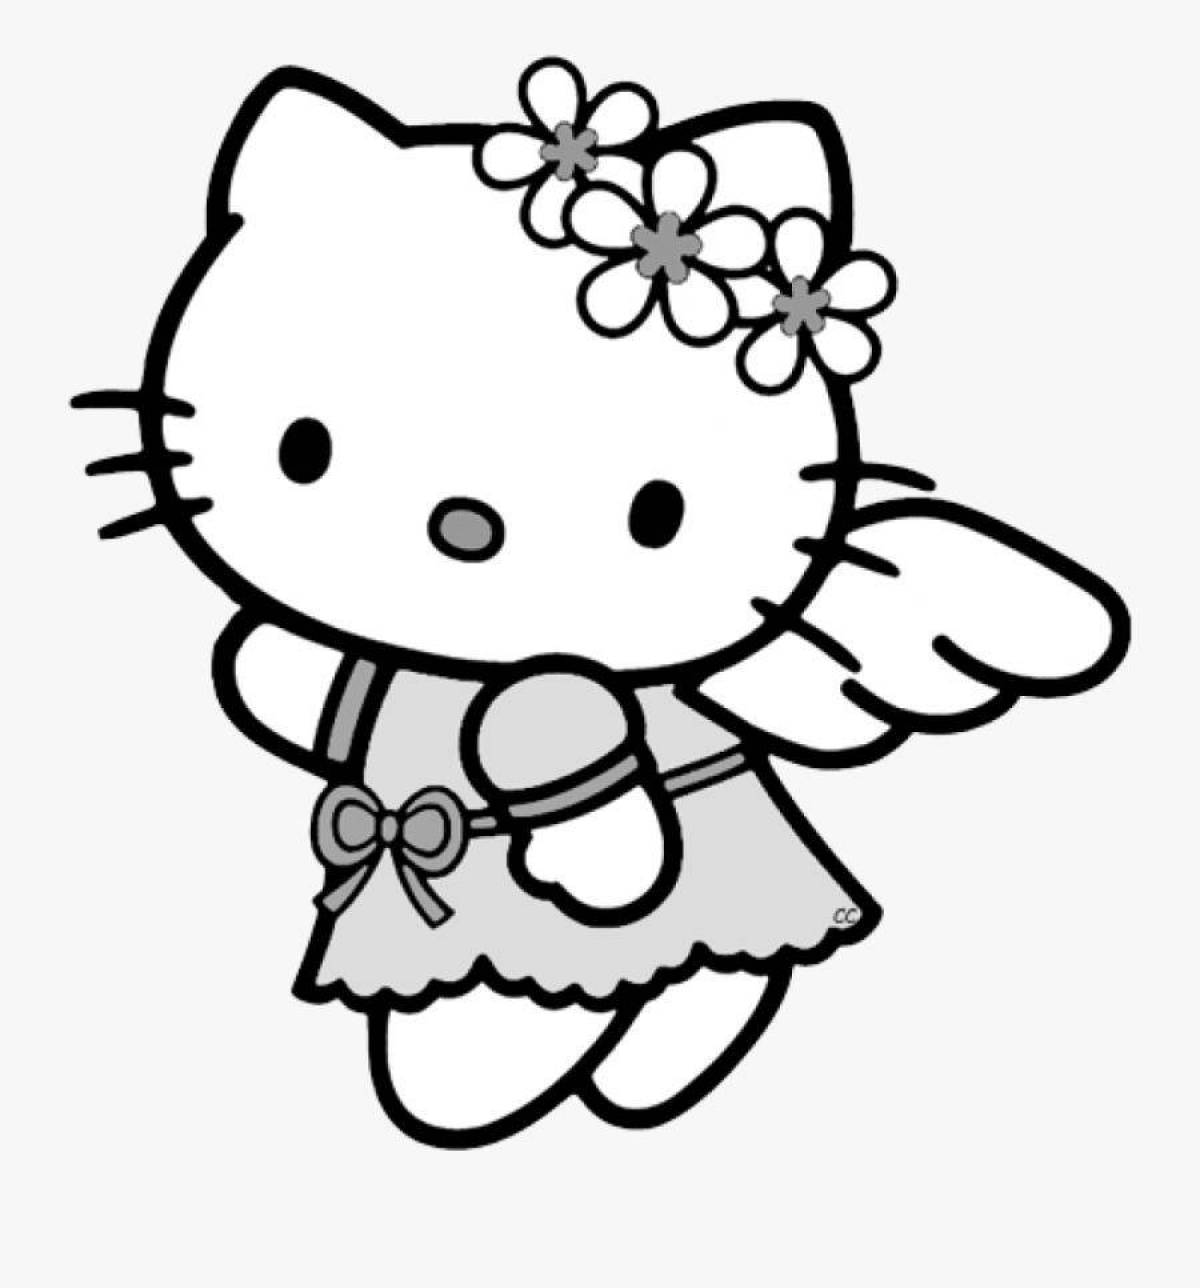 Coloring pages for little girls